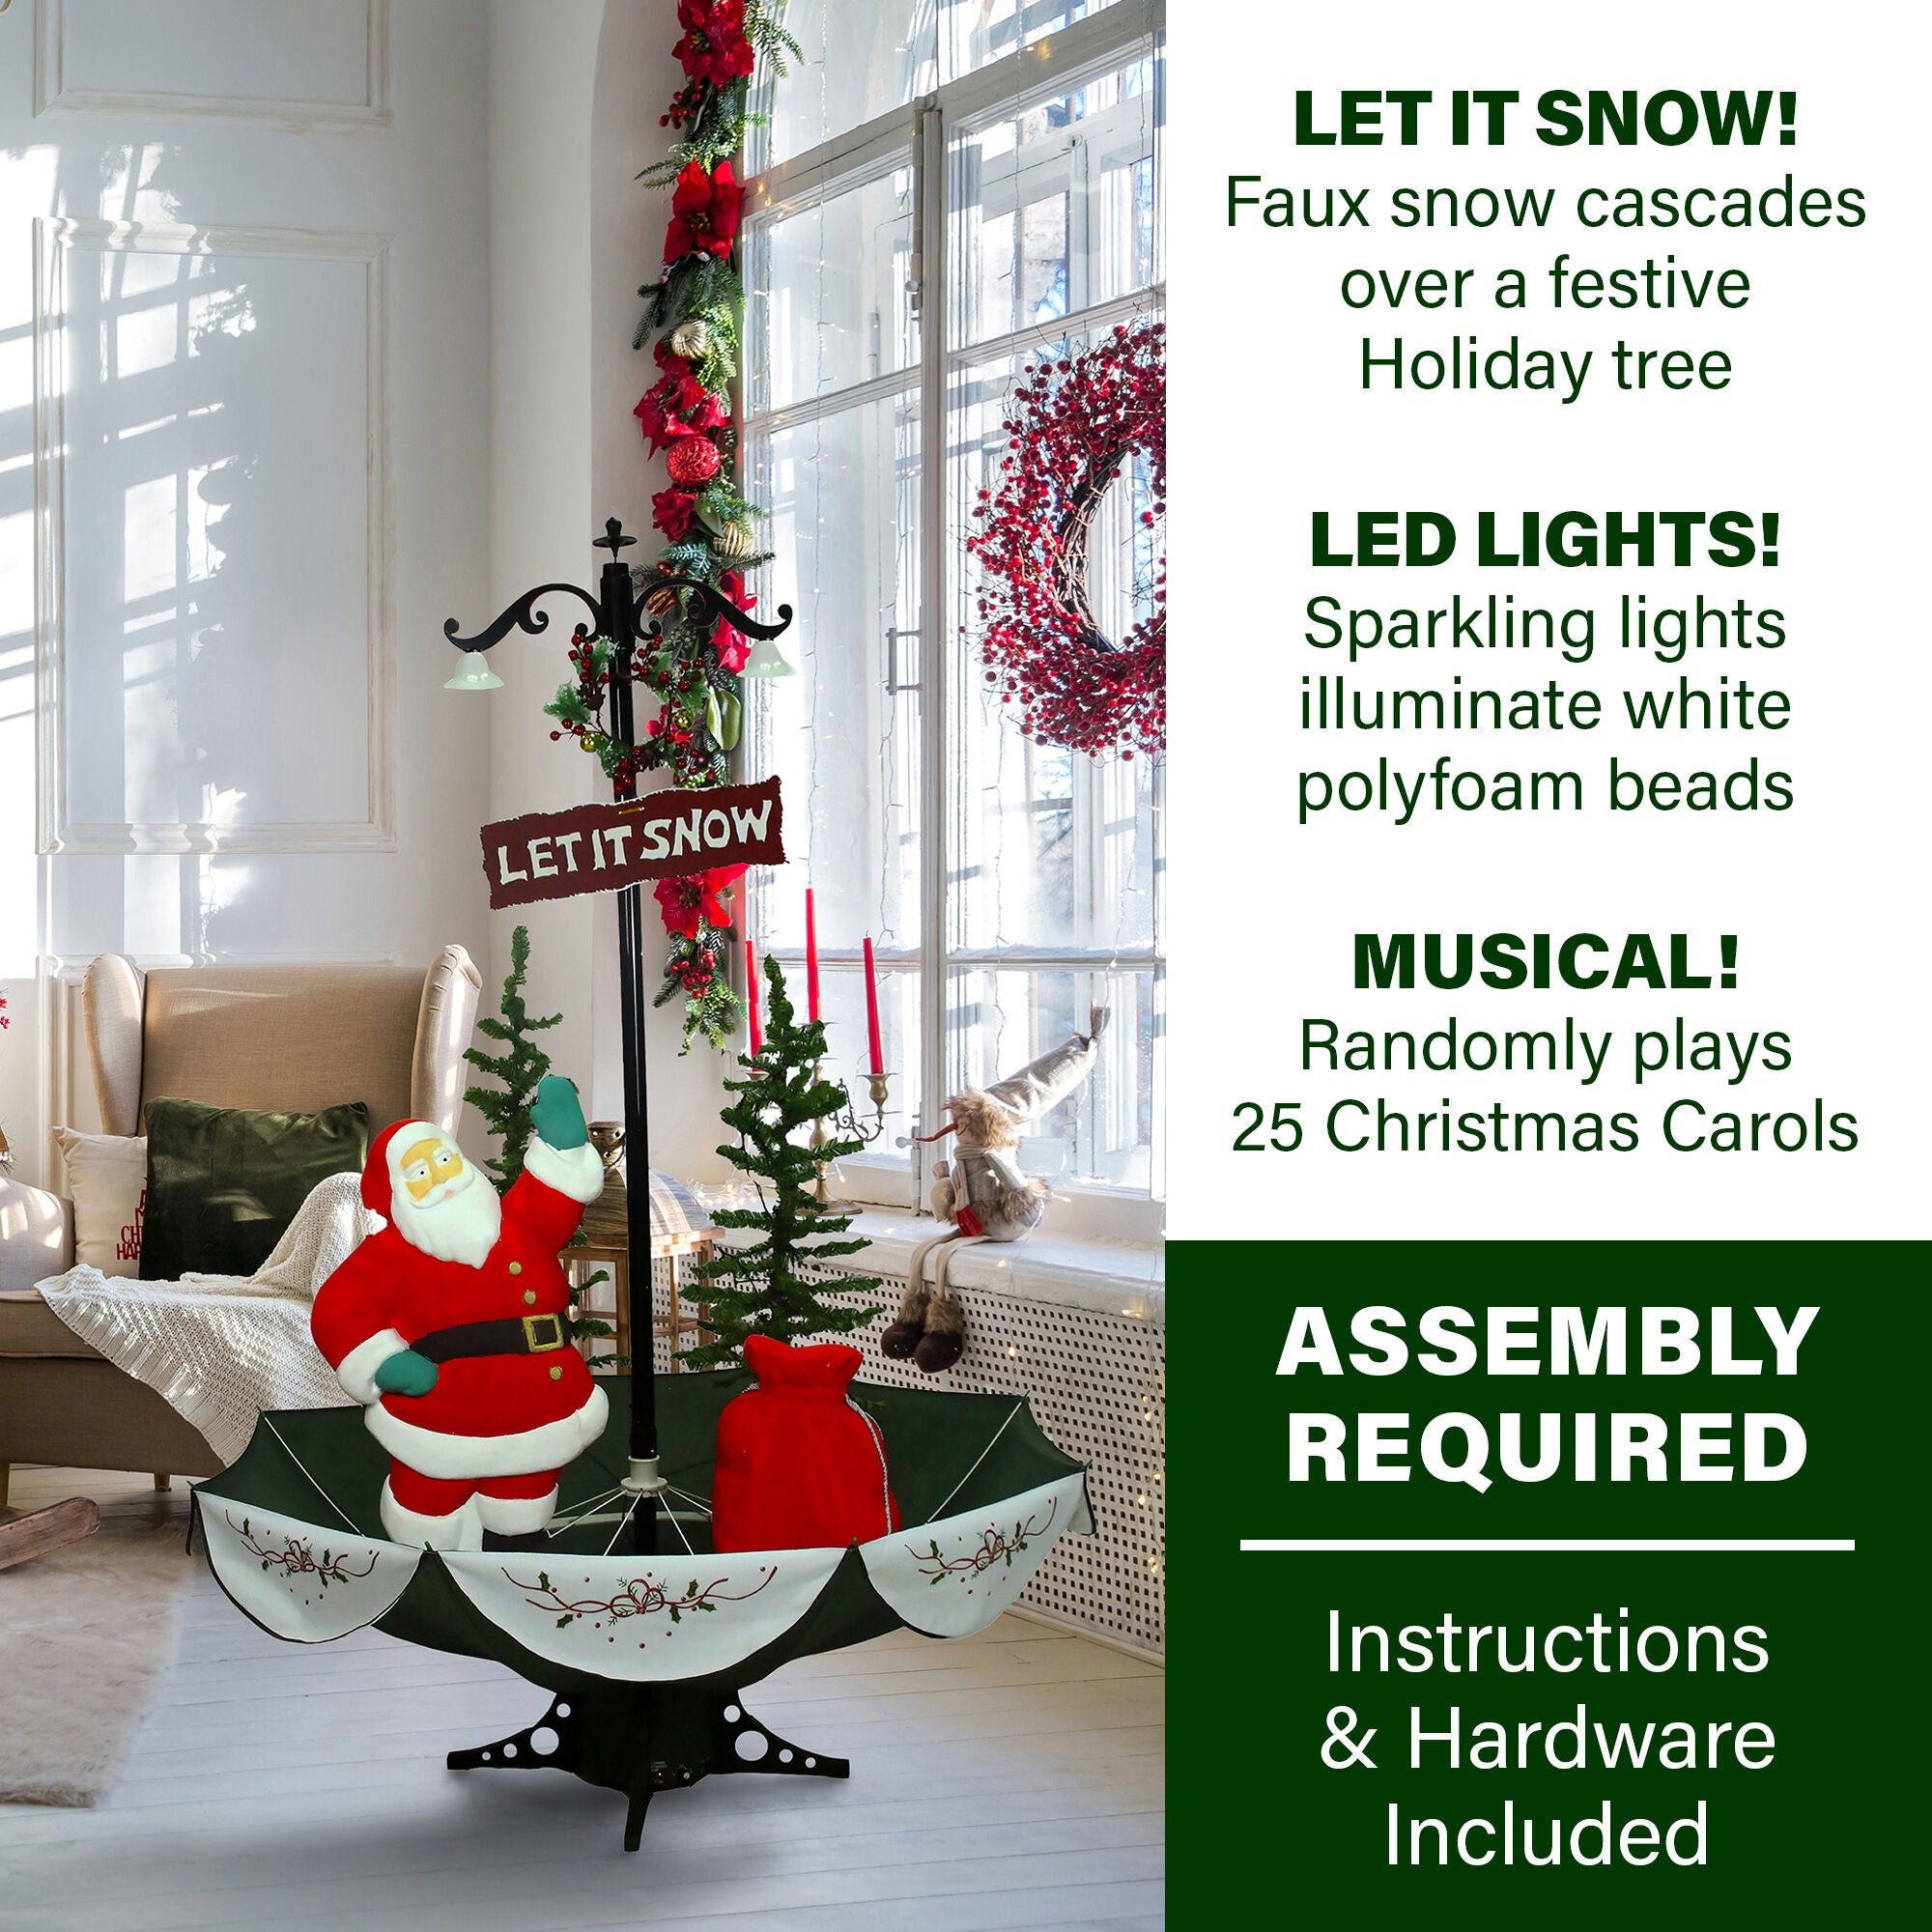 Fraser Hill Farm -  Let It Snow Series 47-In. Musical Santa Scene with Green Umbrella Base, Snow Function, and Lights